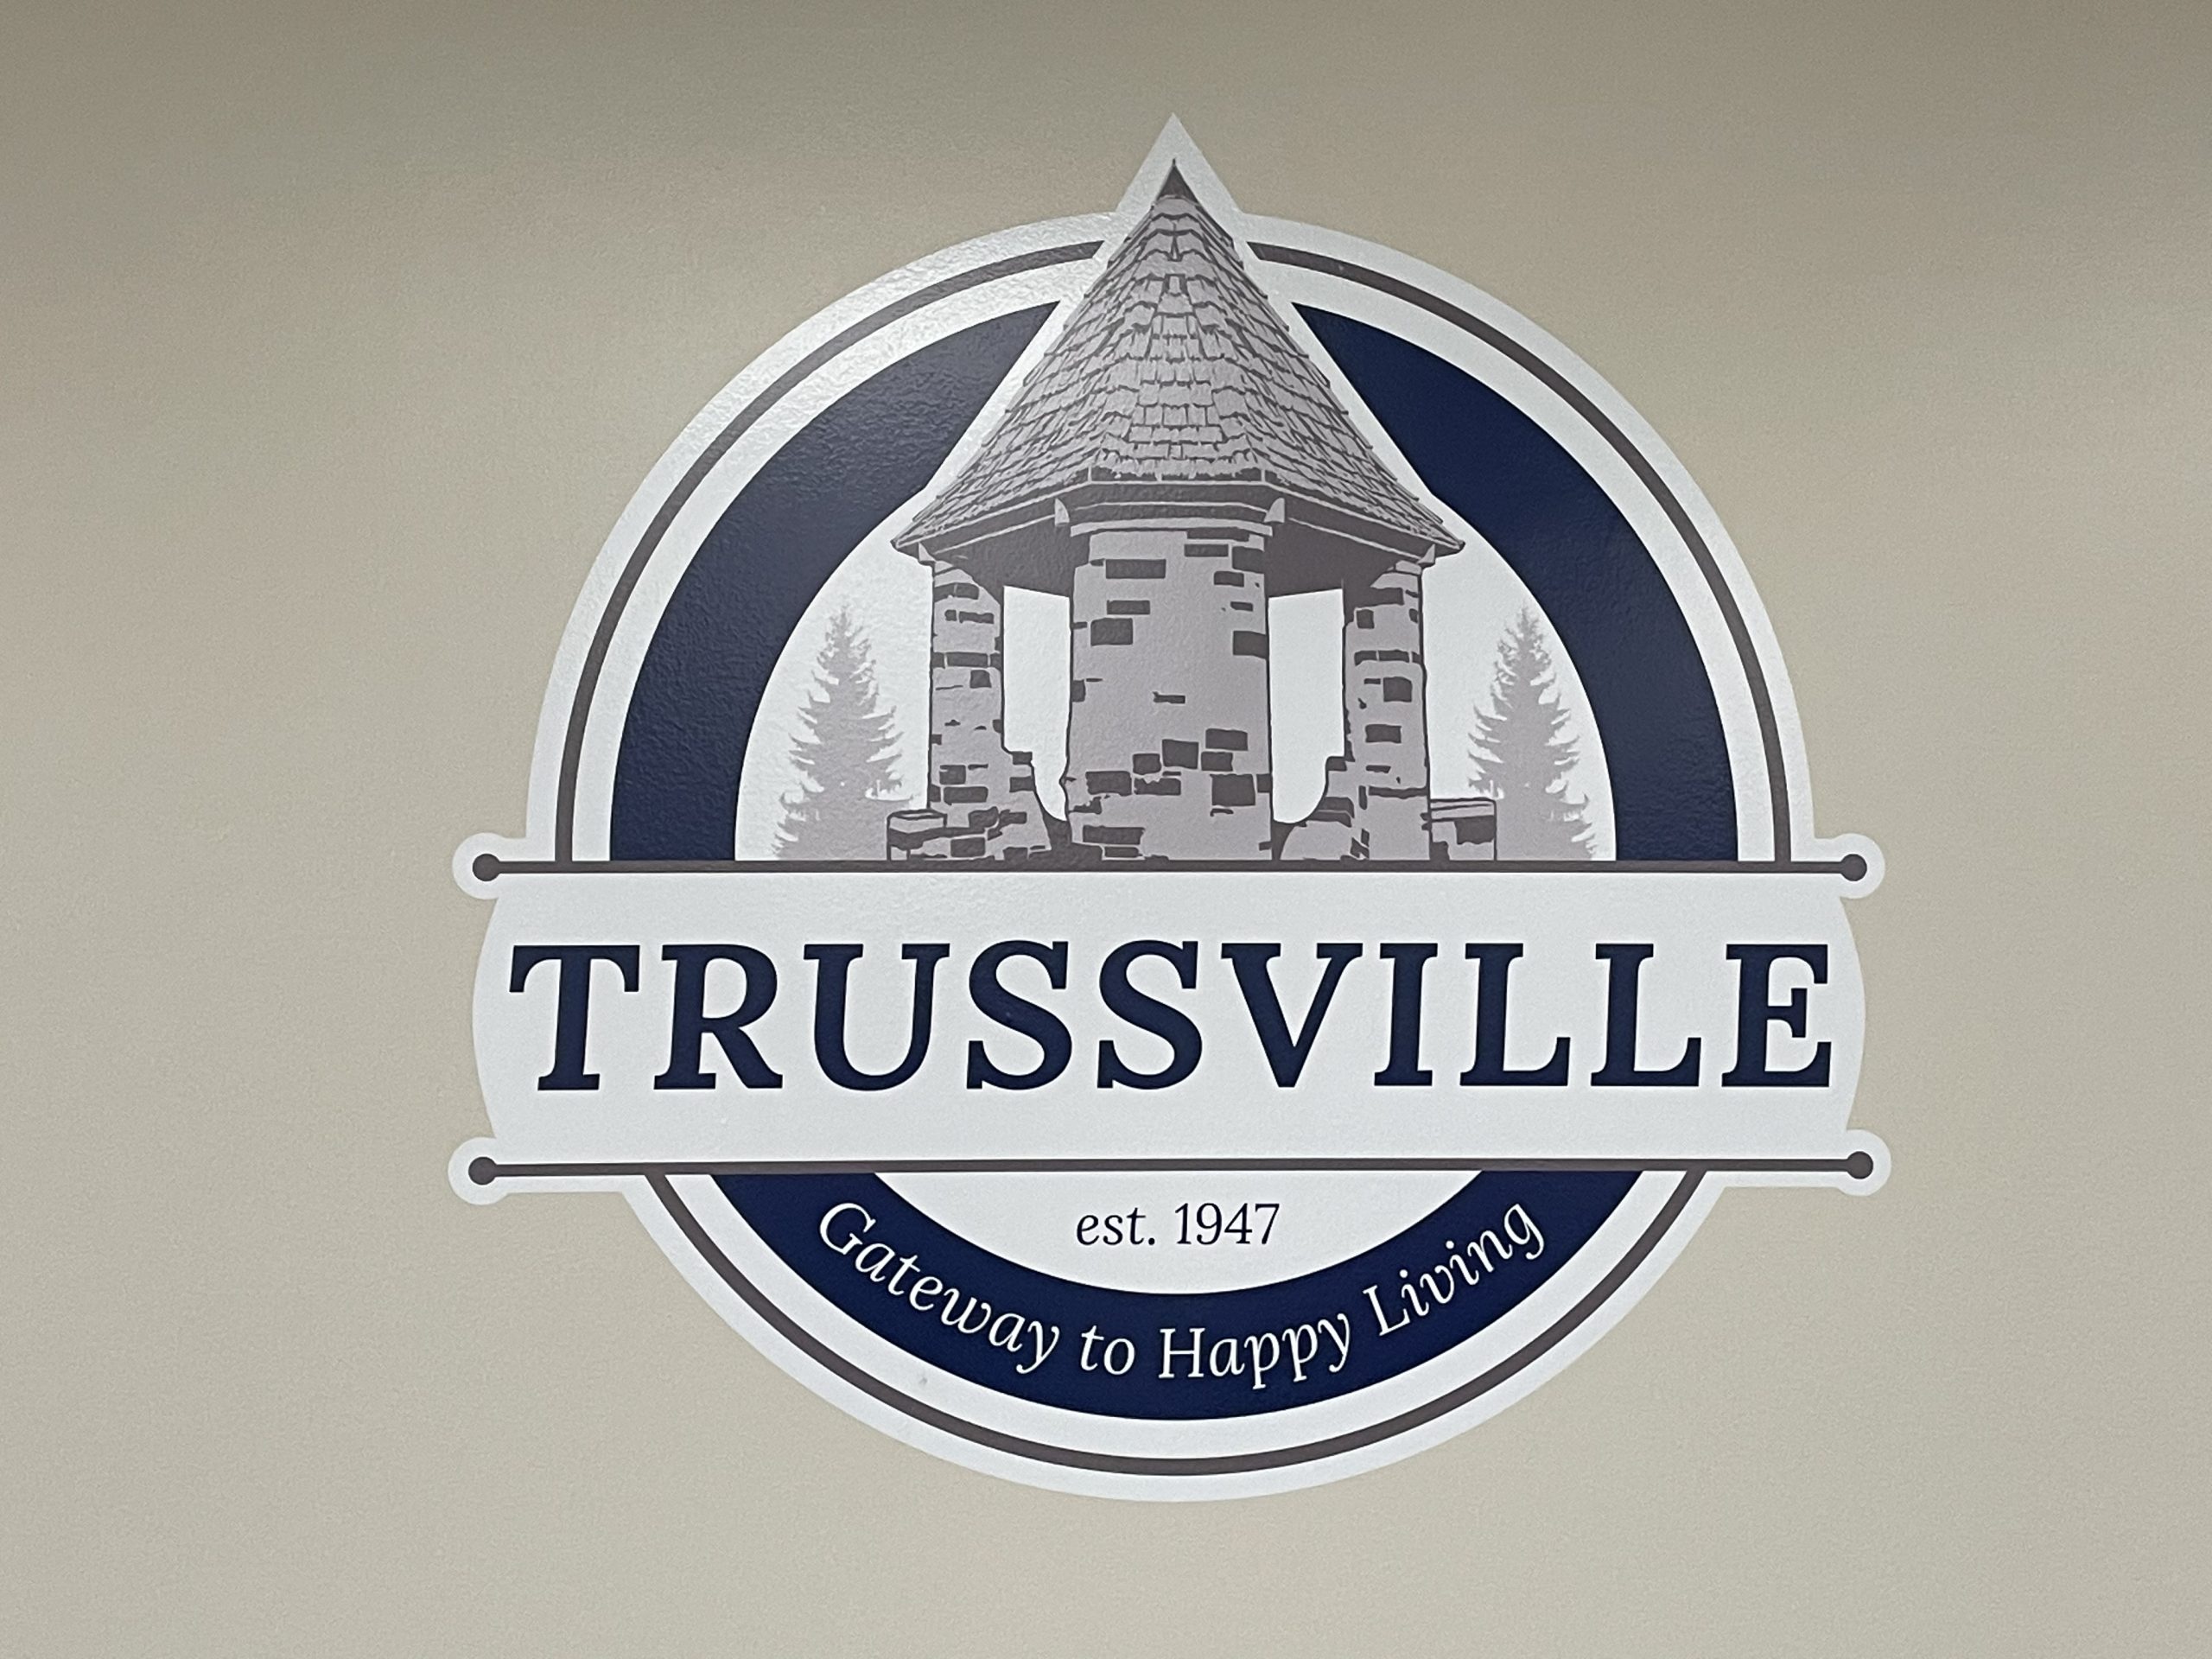 City of Trussville purchases 'Glendale Farms' property for potential new school